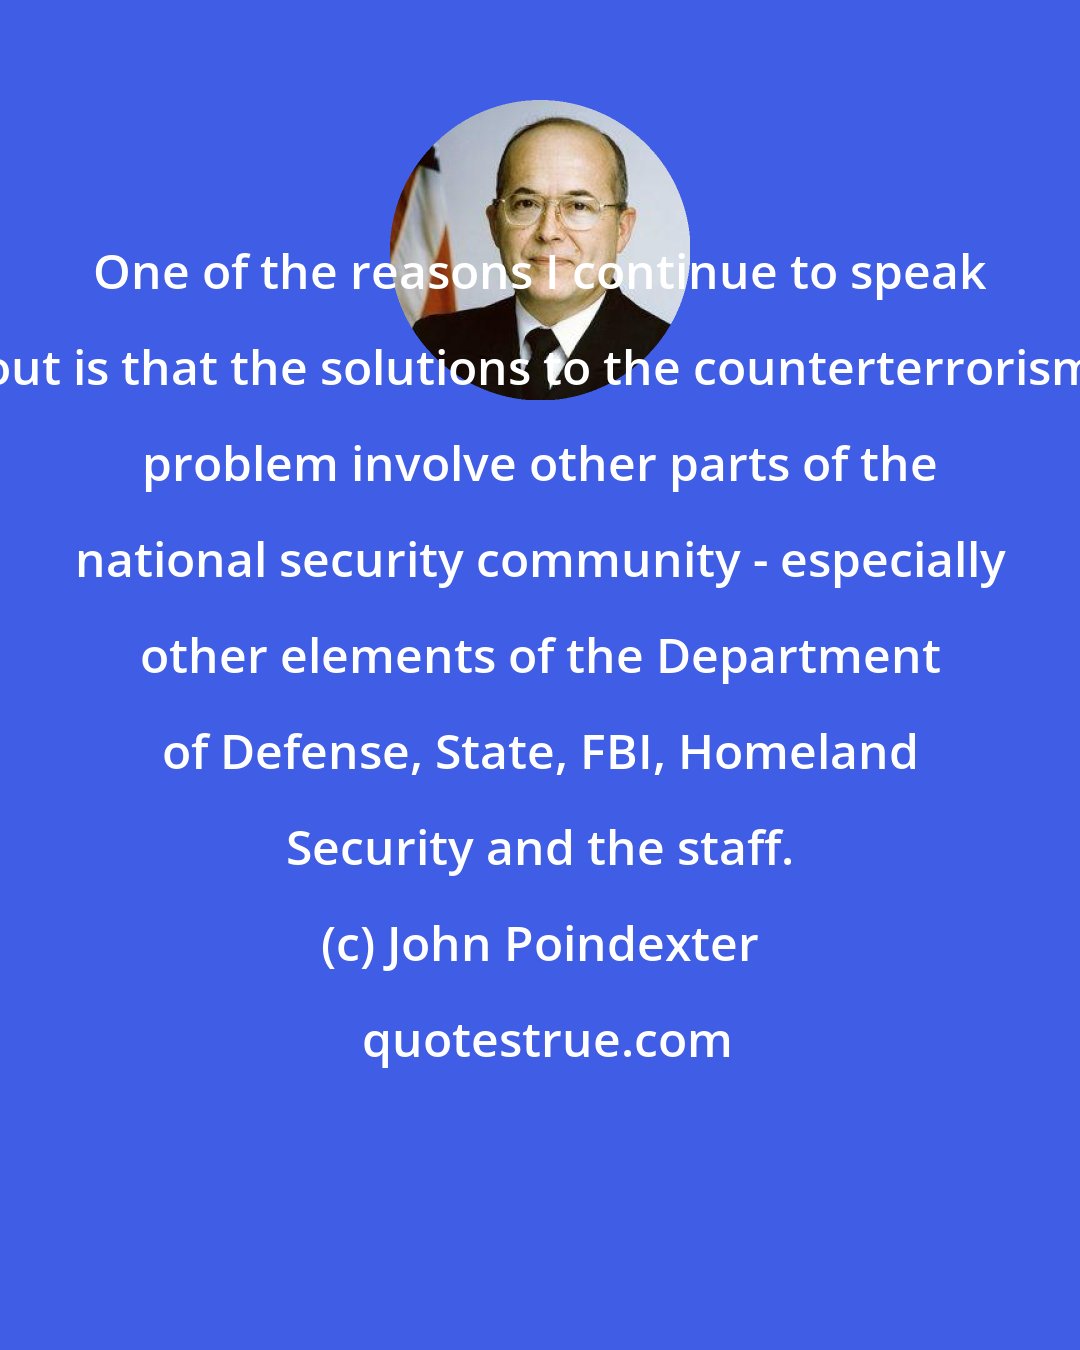 John Poindexter: One of the reasons I continue to speak out is that the solutions to the counterterrorism problem involve other parts of the national security community - especially other elements of the Department of Defense, State, FBI, Homeland Security and the staff.